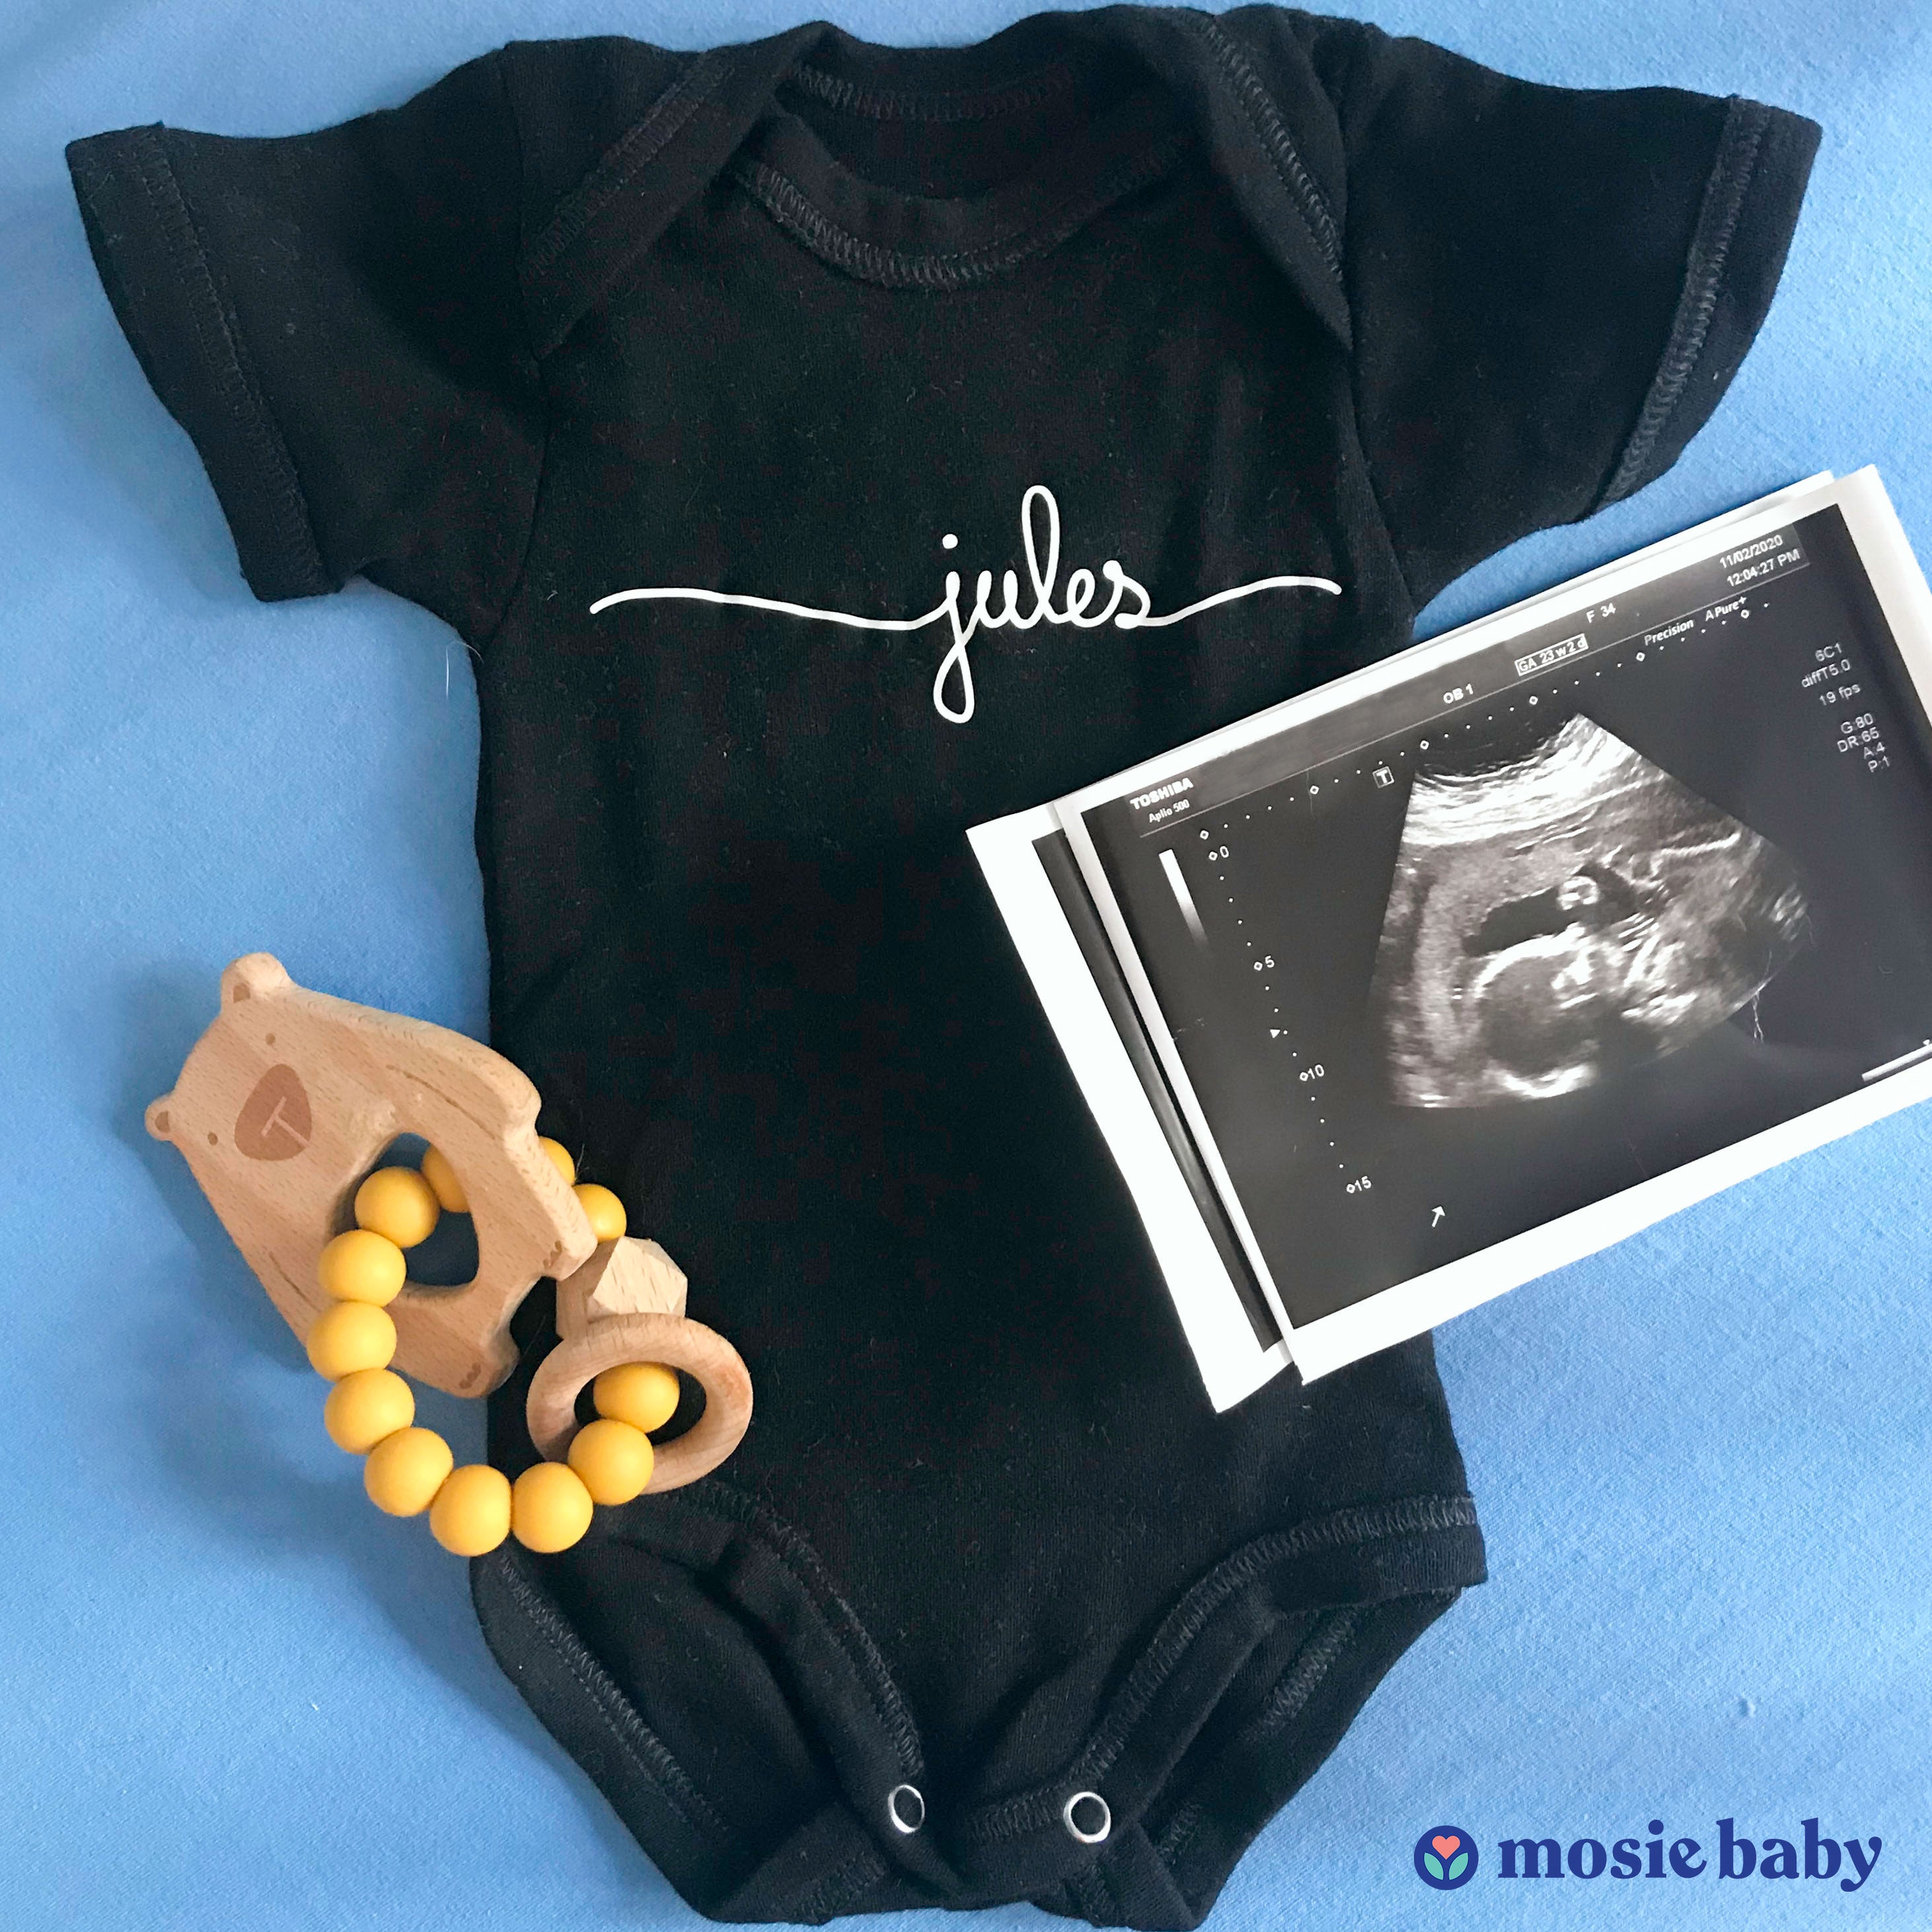 Mosie Baby Pregnancy Announcement with Onesie and Sonorgram